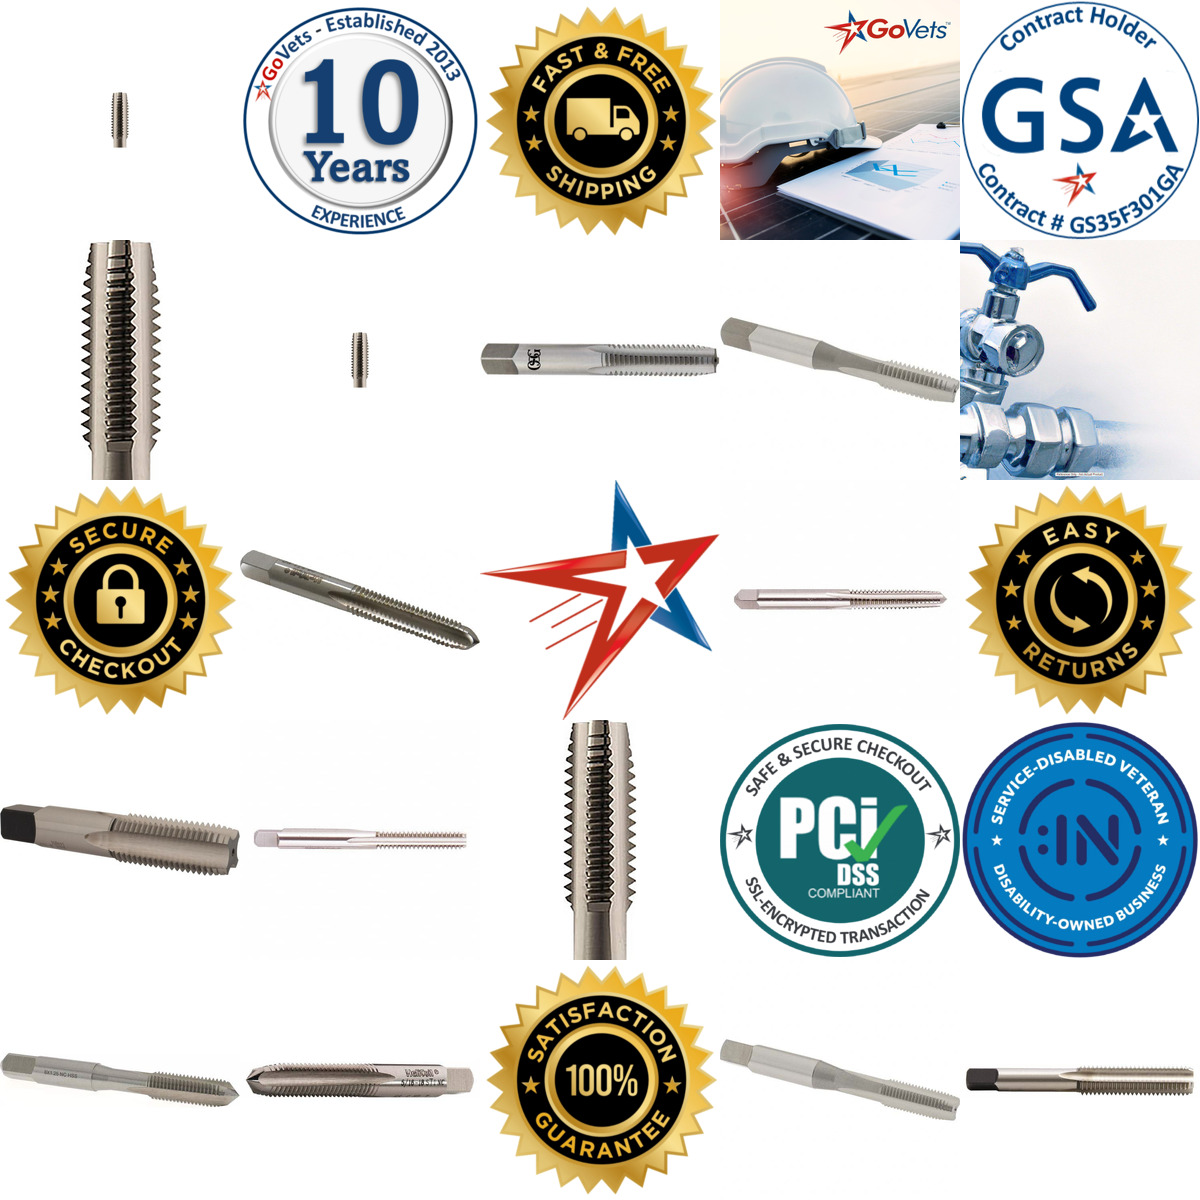 A selection of Hand Sti Taps products on GoVets